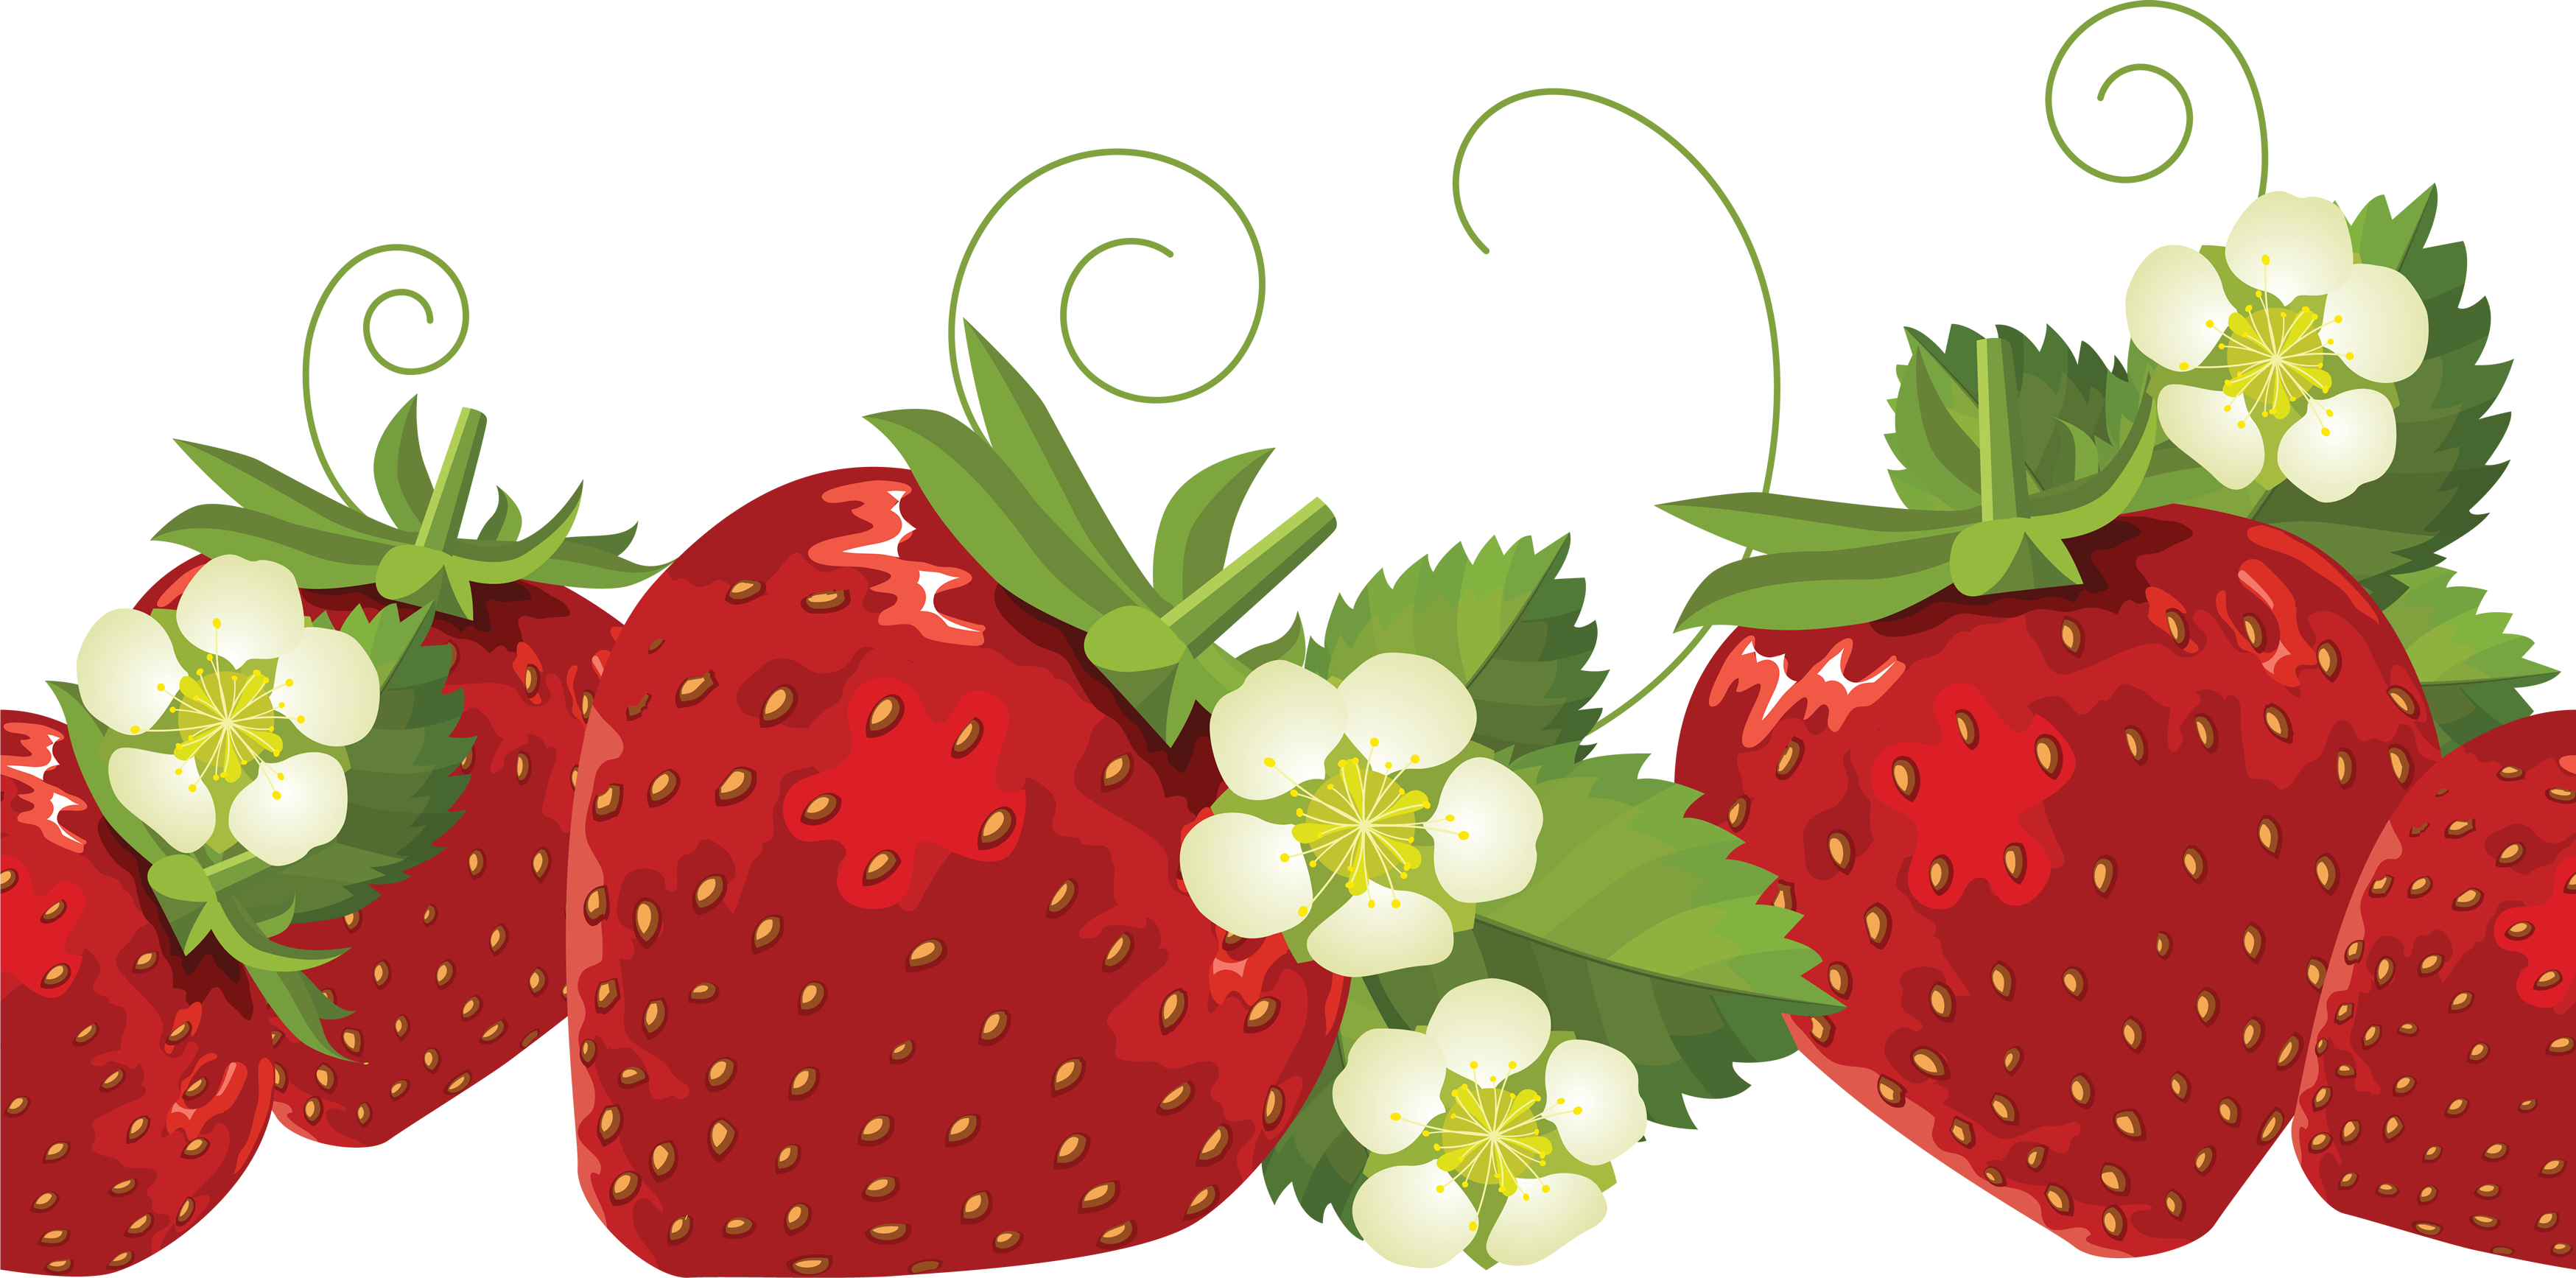 Clipart box strawberry, Clipart box strawberry Transparent FREE for